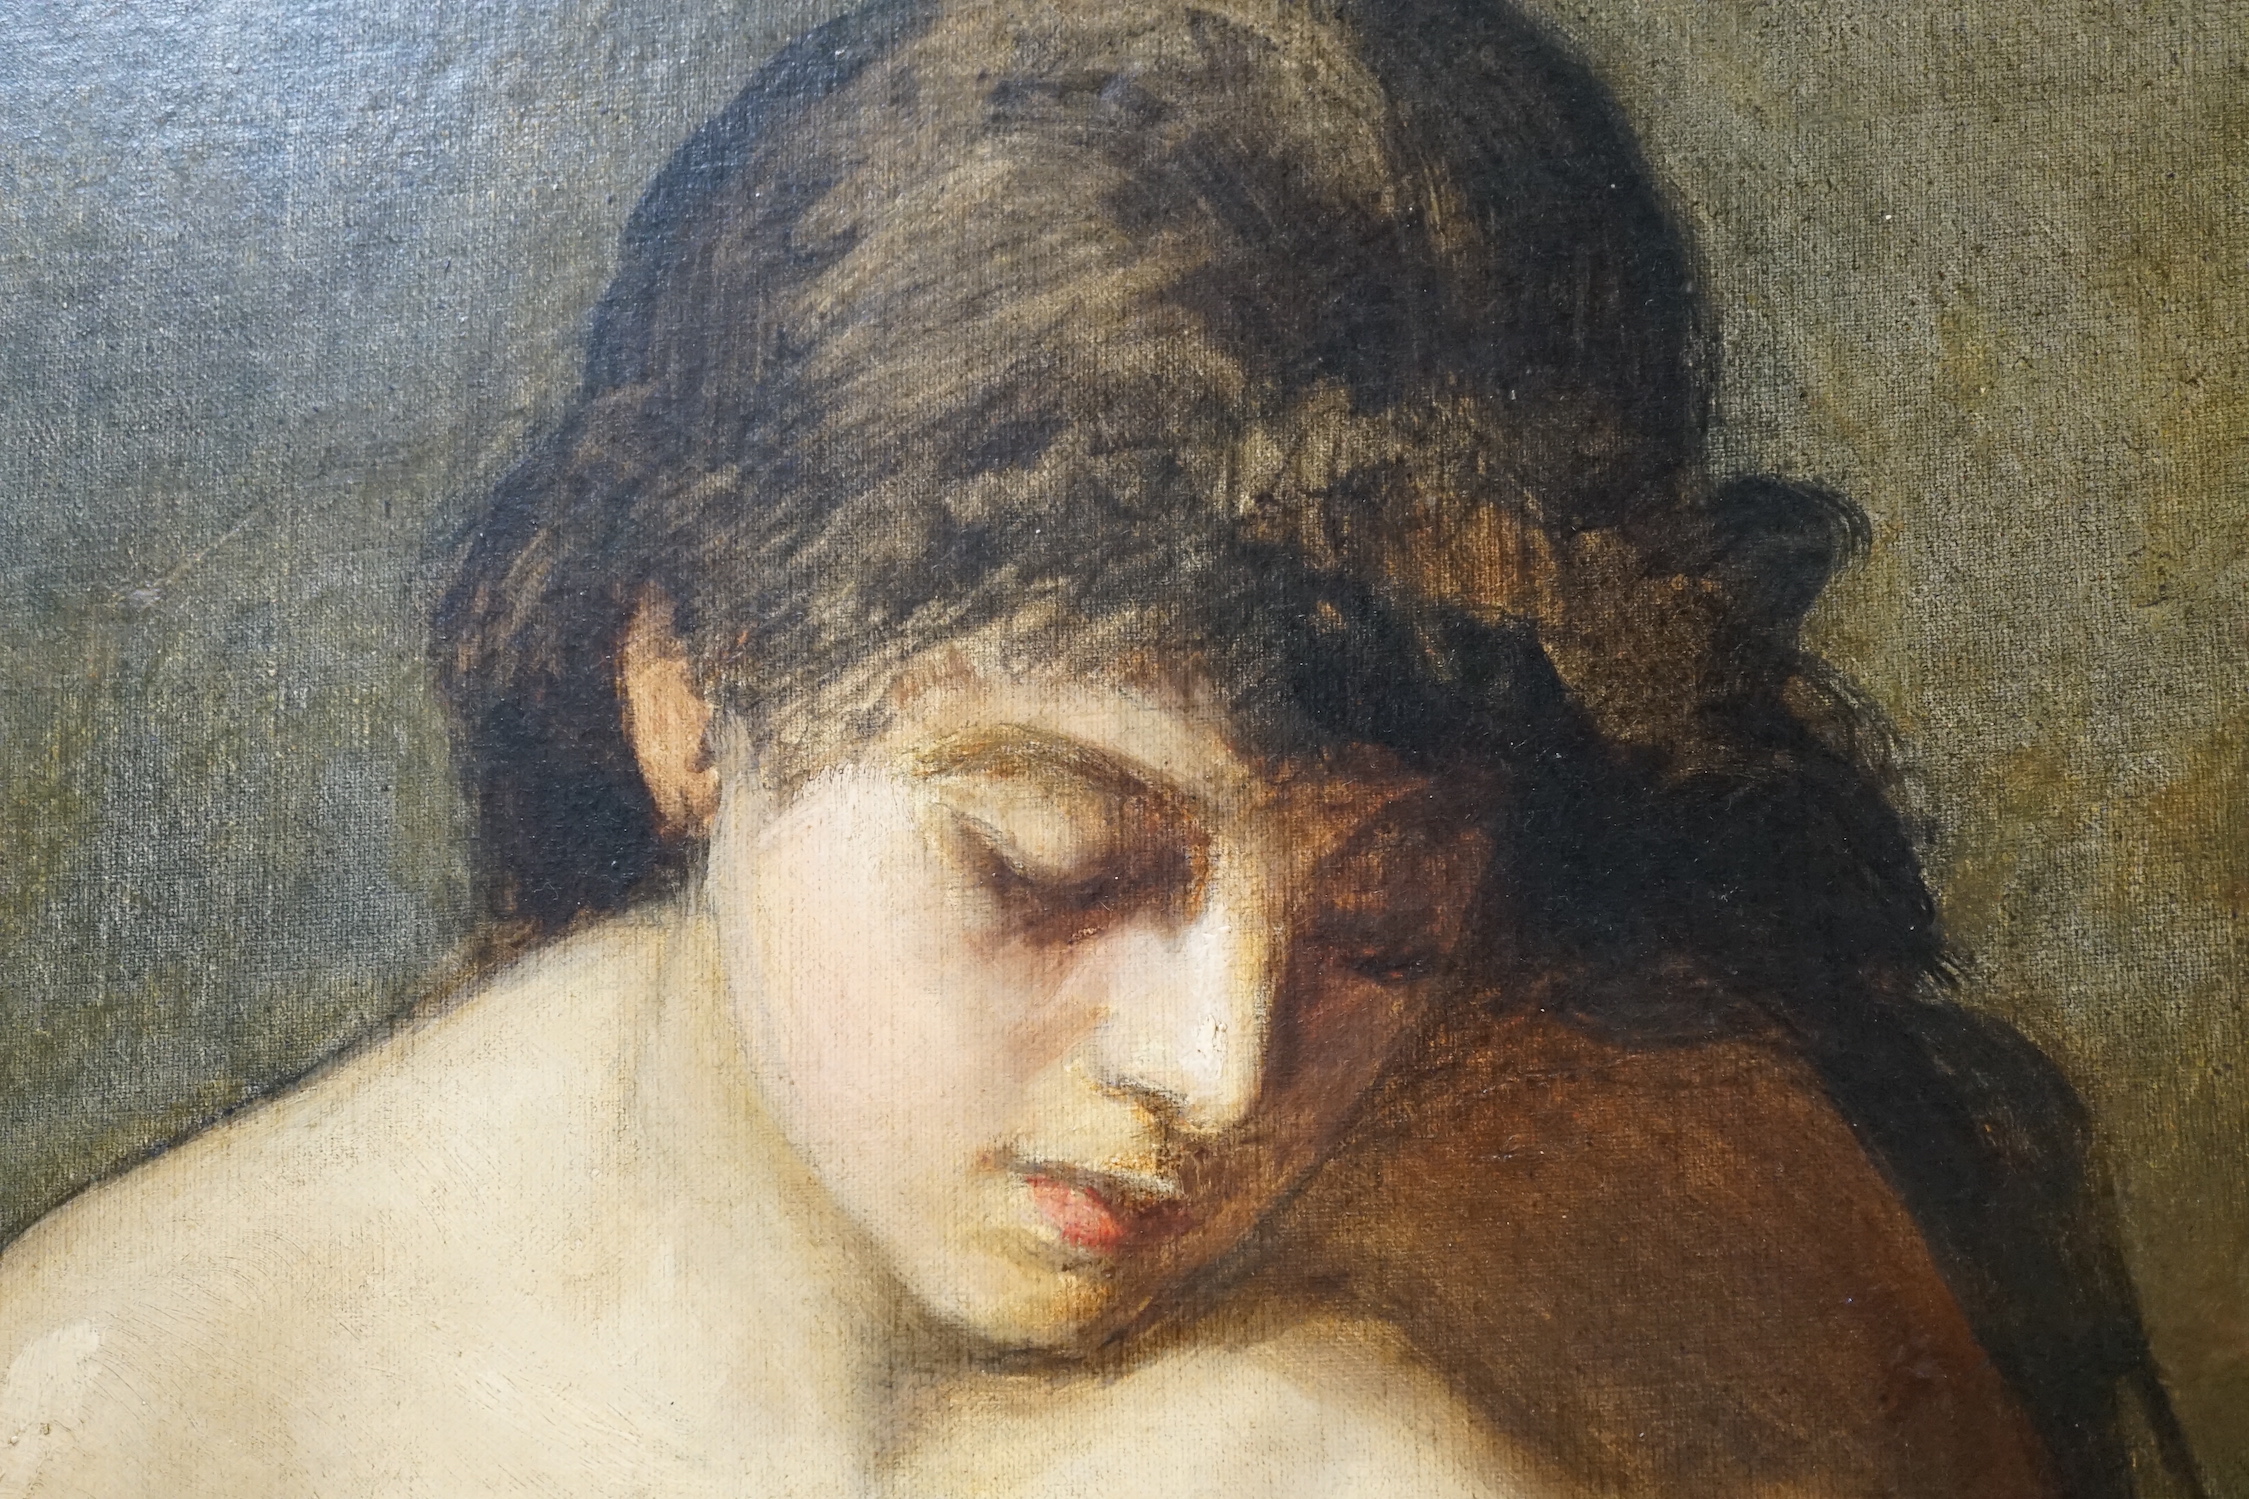 Late 19th Century French School, Seated female nude holding a seashell, oil on canvas, 78 x 98cm